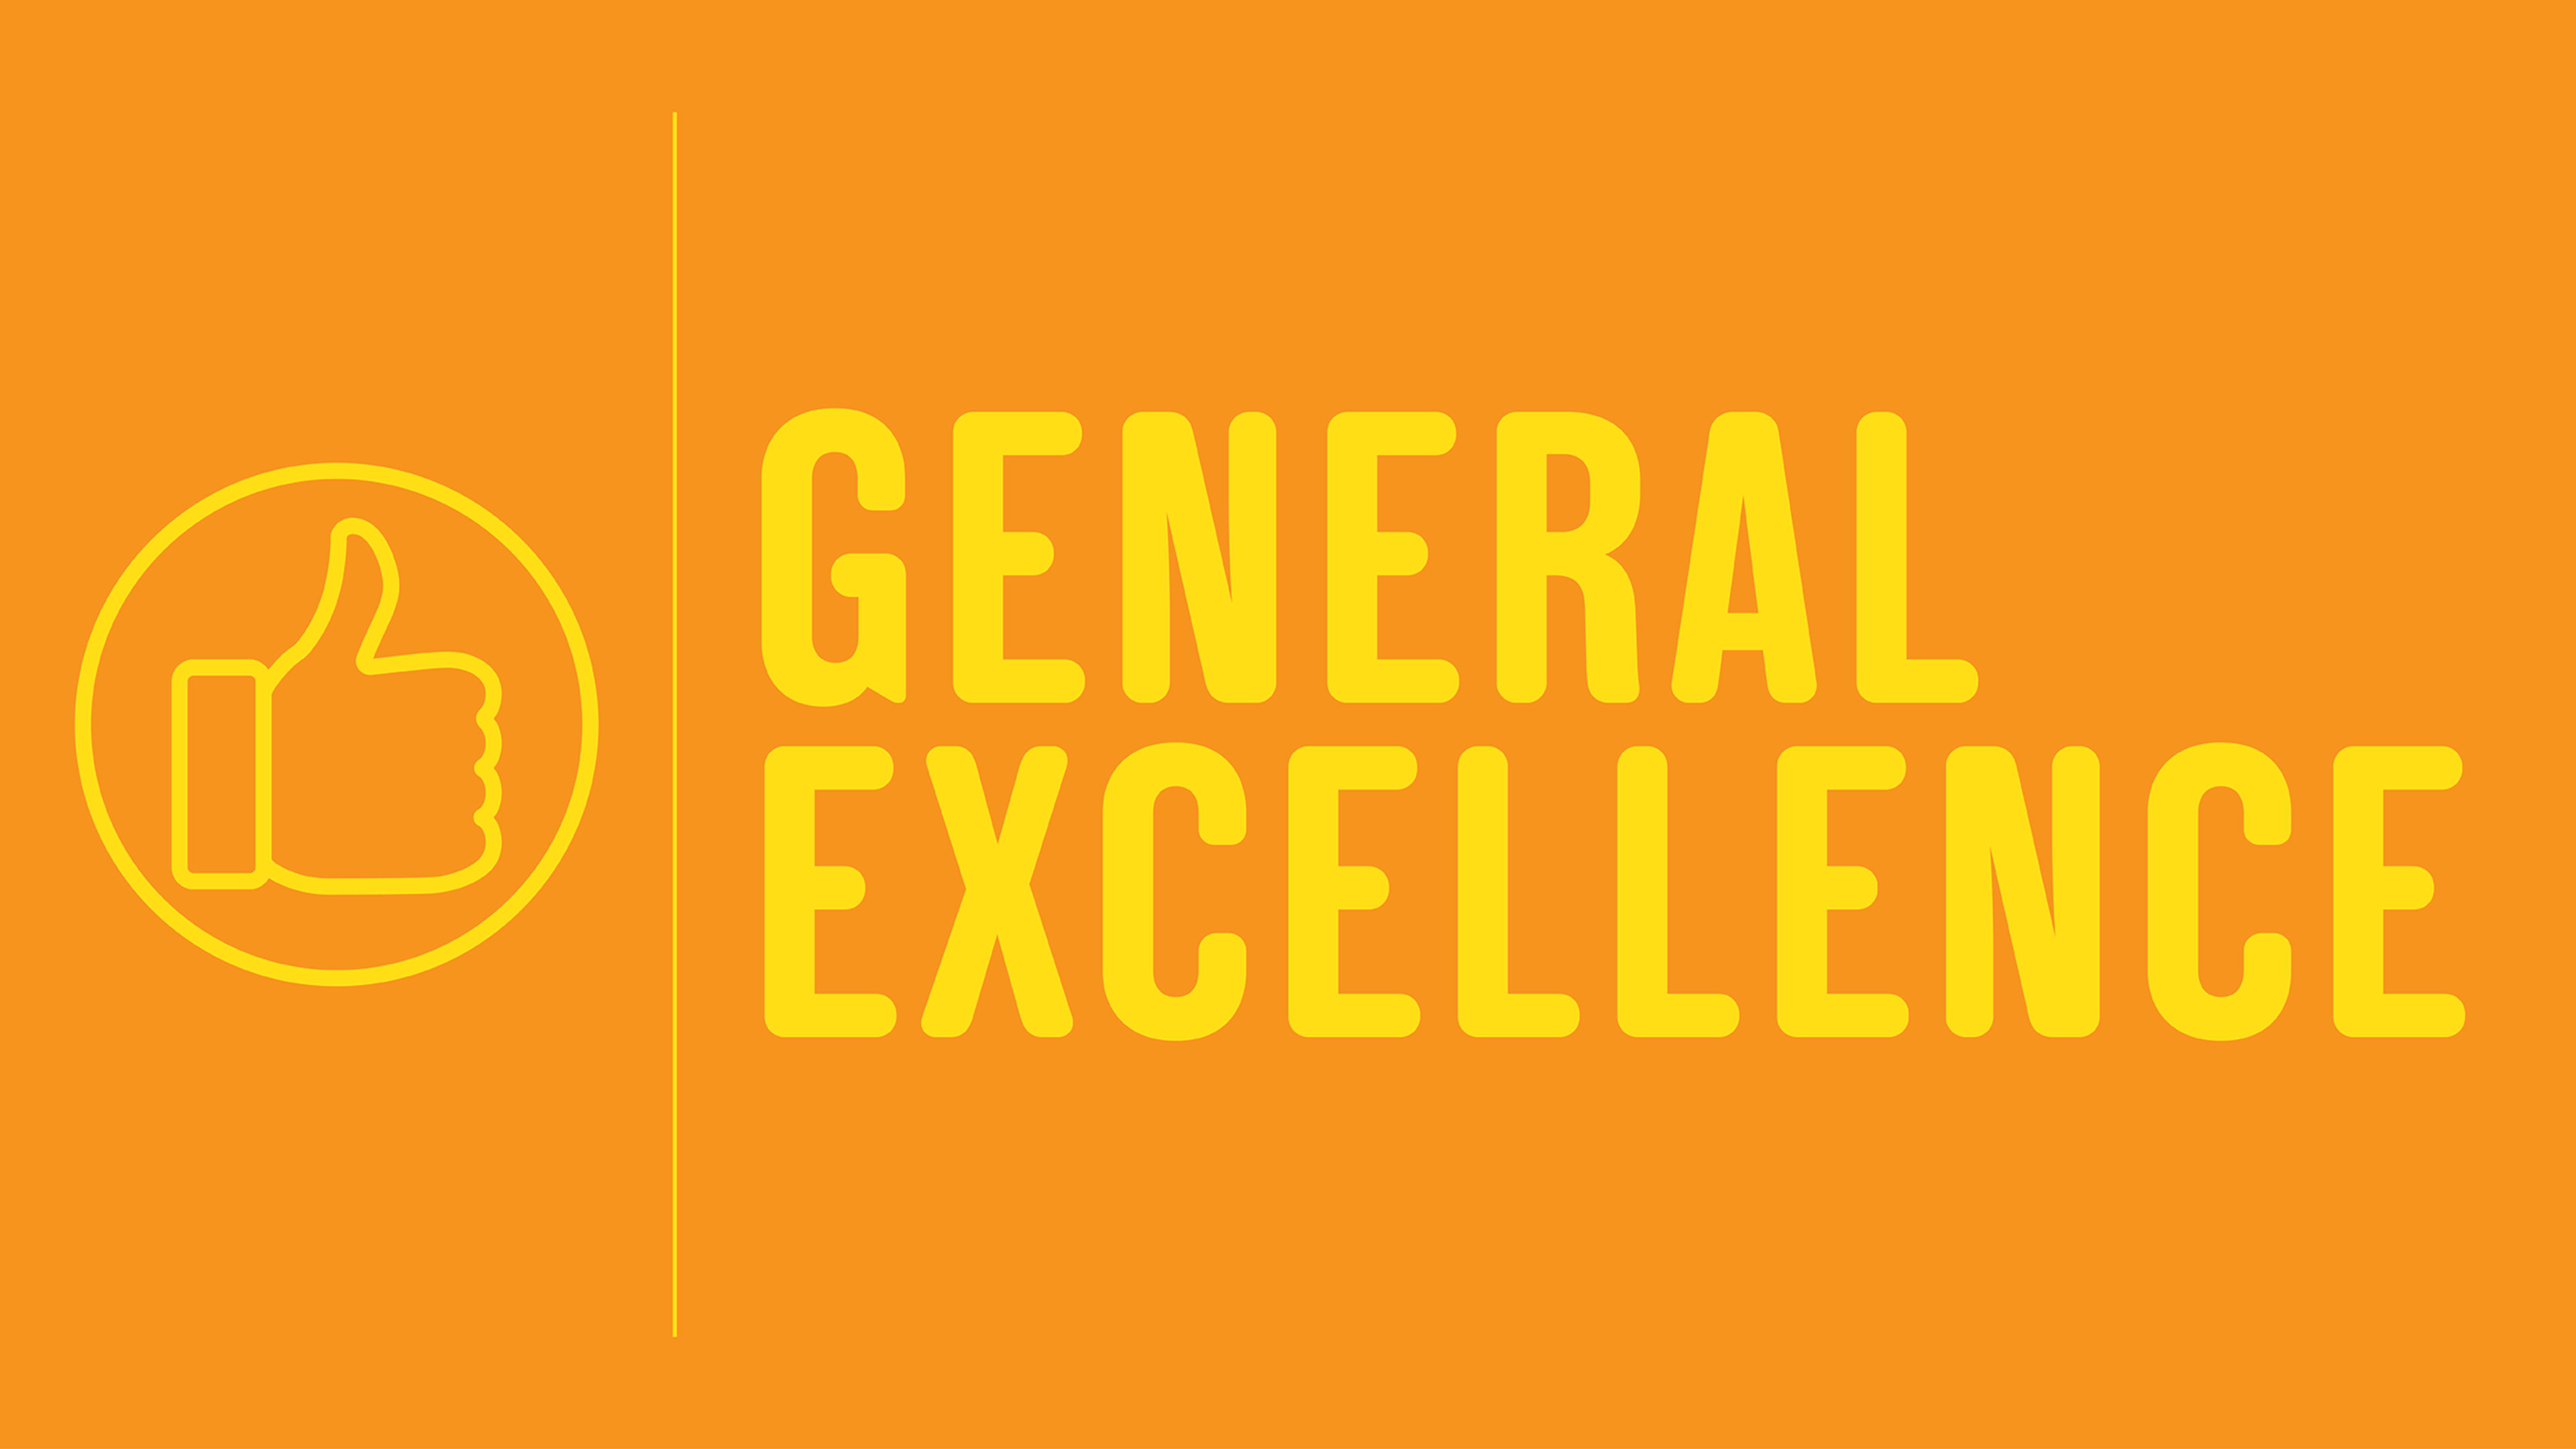 World Changing Ideas Awards 2020: General Excellence Finalists and Honorable Mentions